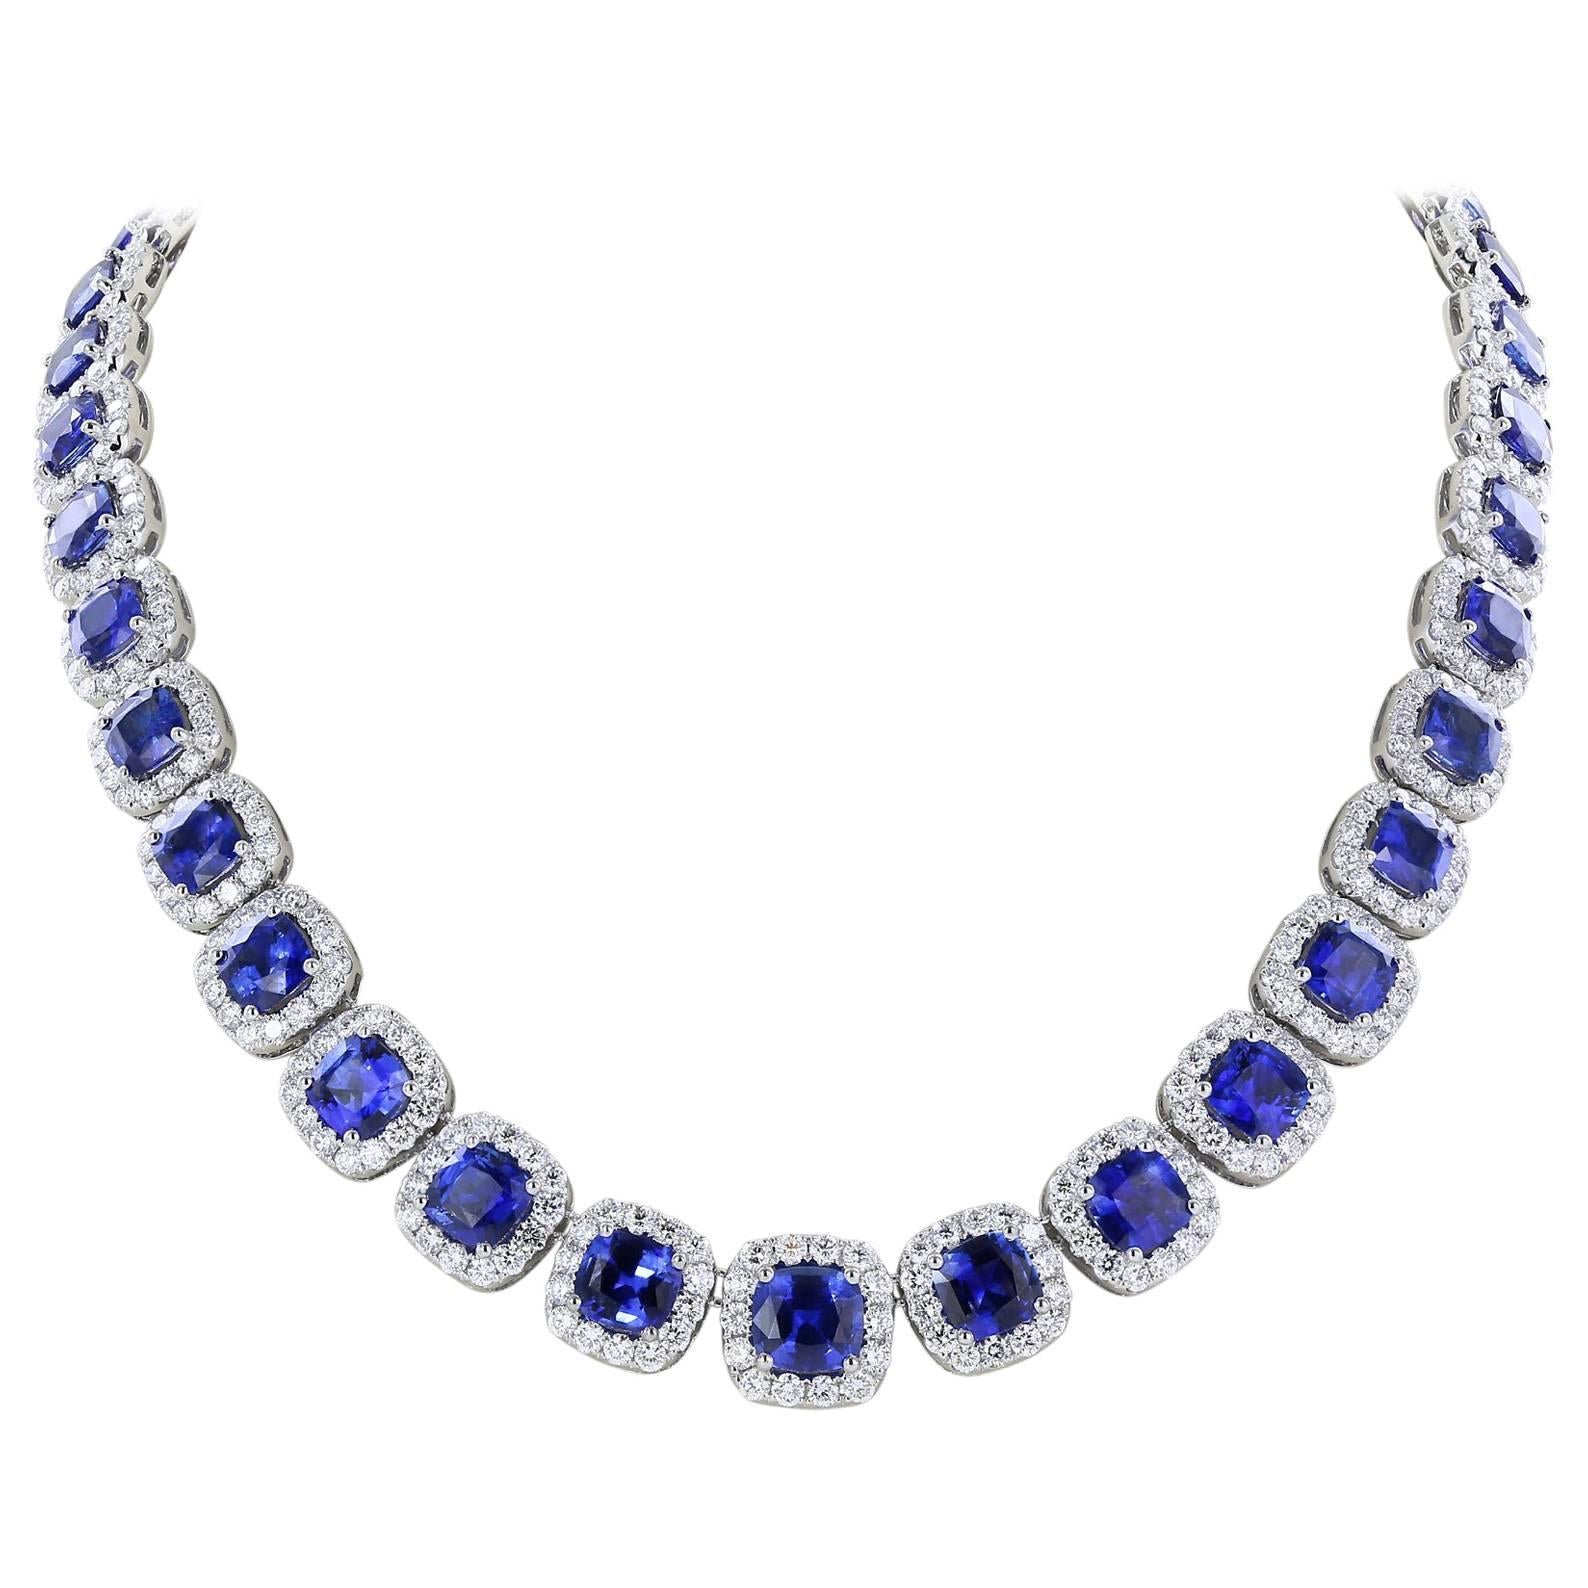 Sapphire Diamond Eternity Necklace 40.55 Carats Of Sapphires For Sale